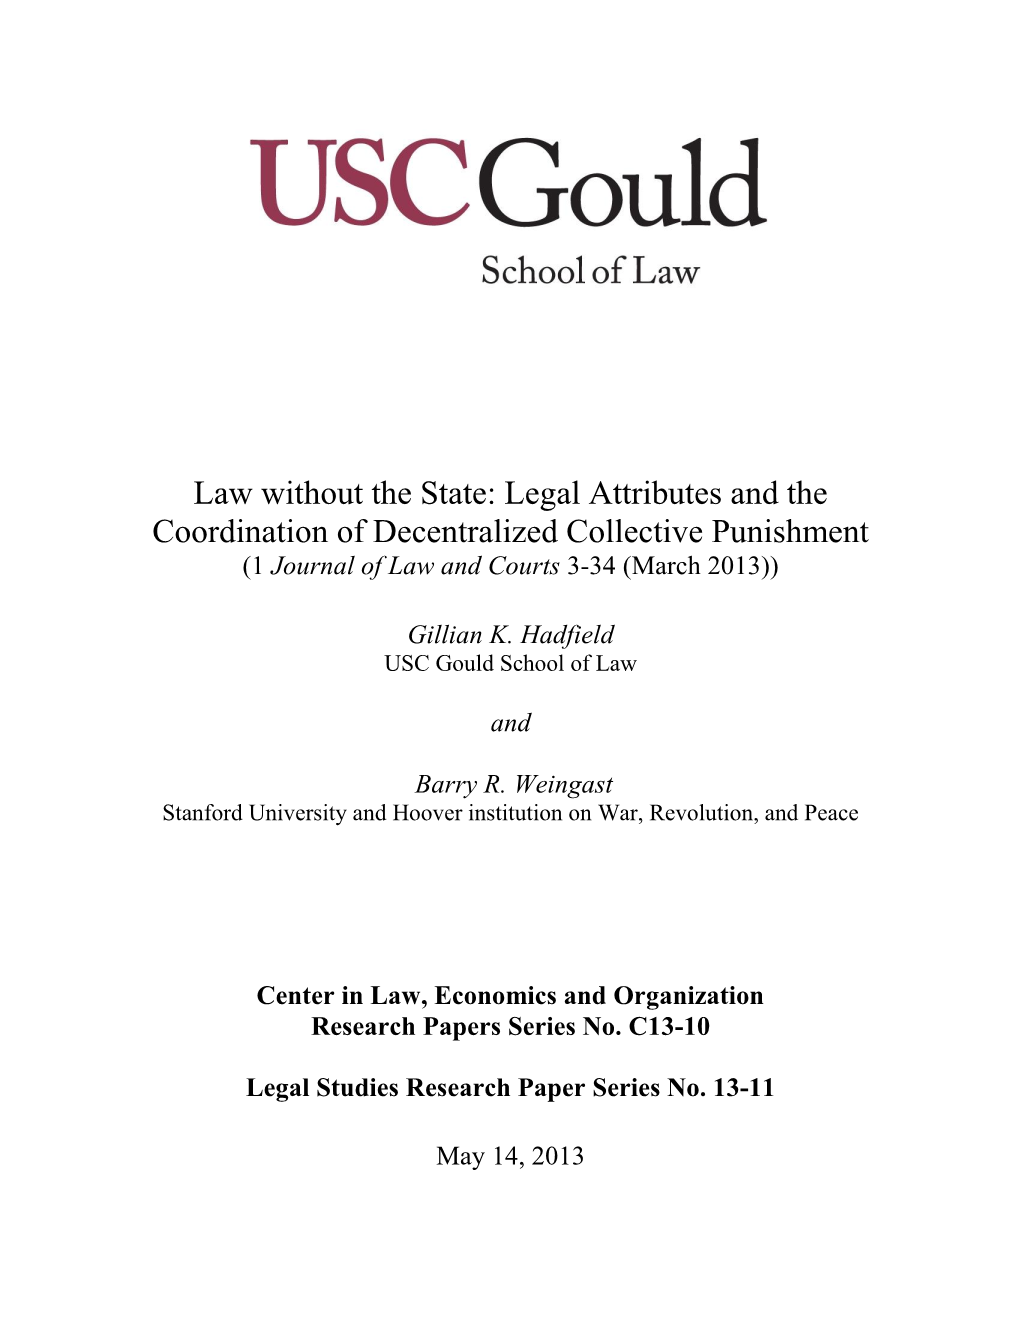 Law Without the State: Legal Attributes and the Coordination of Decentralized Collective Punishment (1 Journal of Law and Courts 3-34 (March 2013))